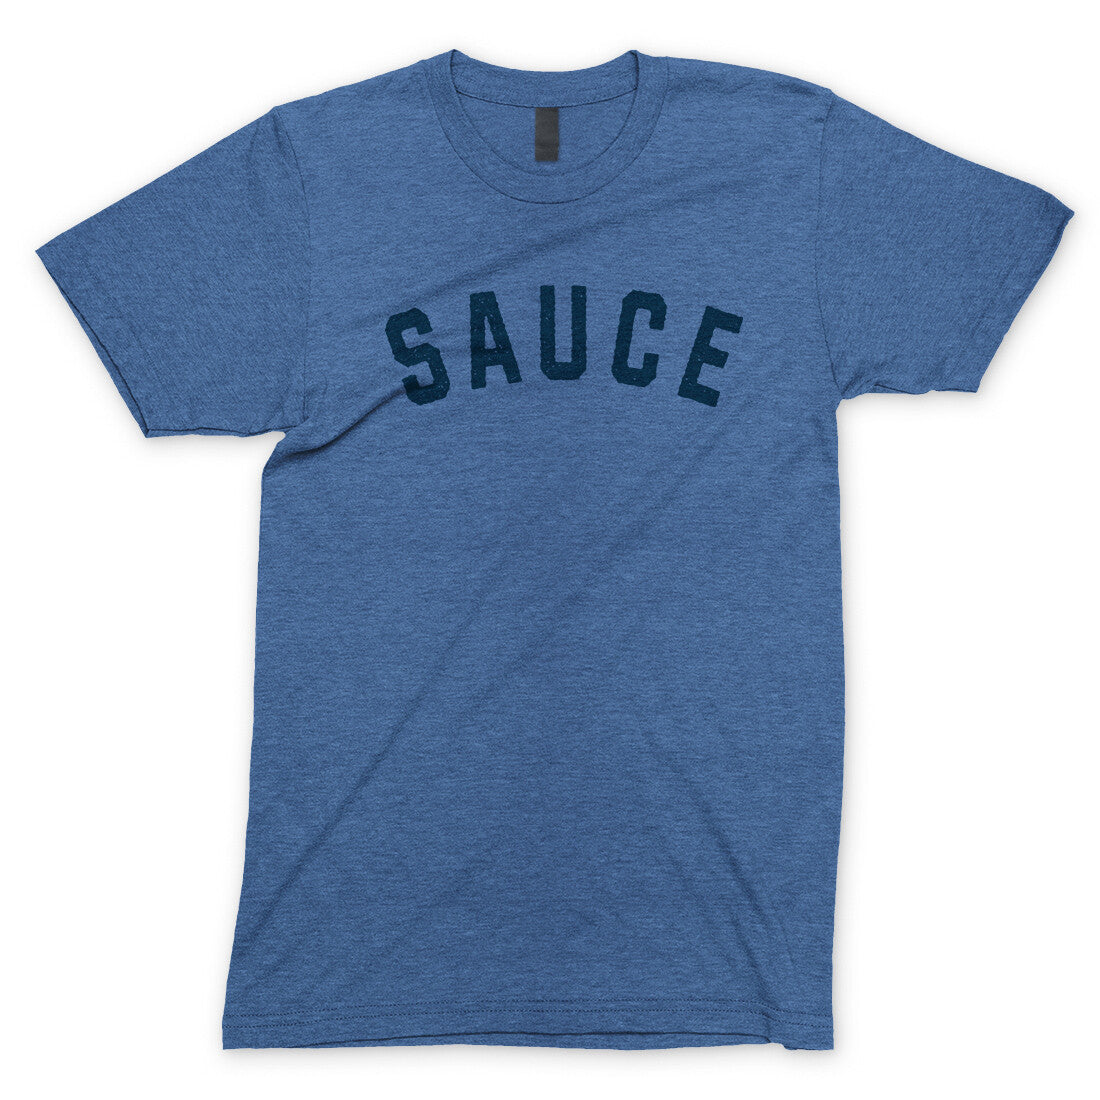 Sauce in Heather Royal Color